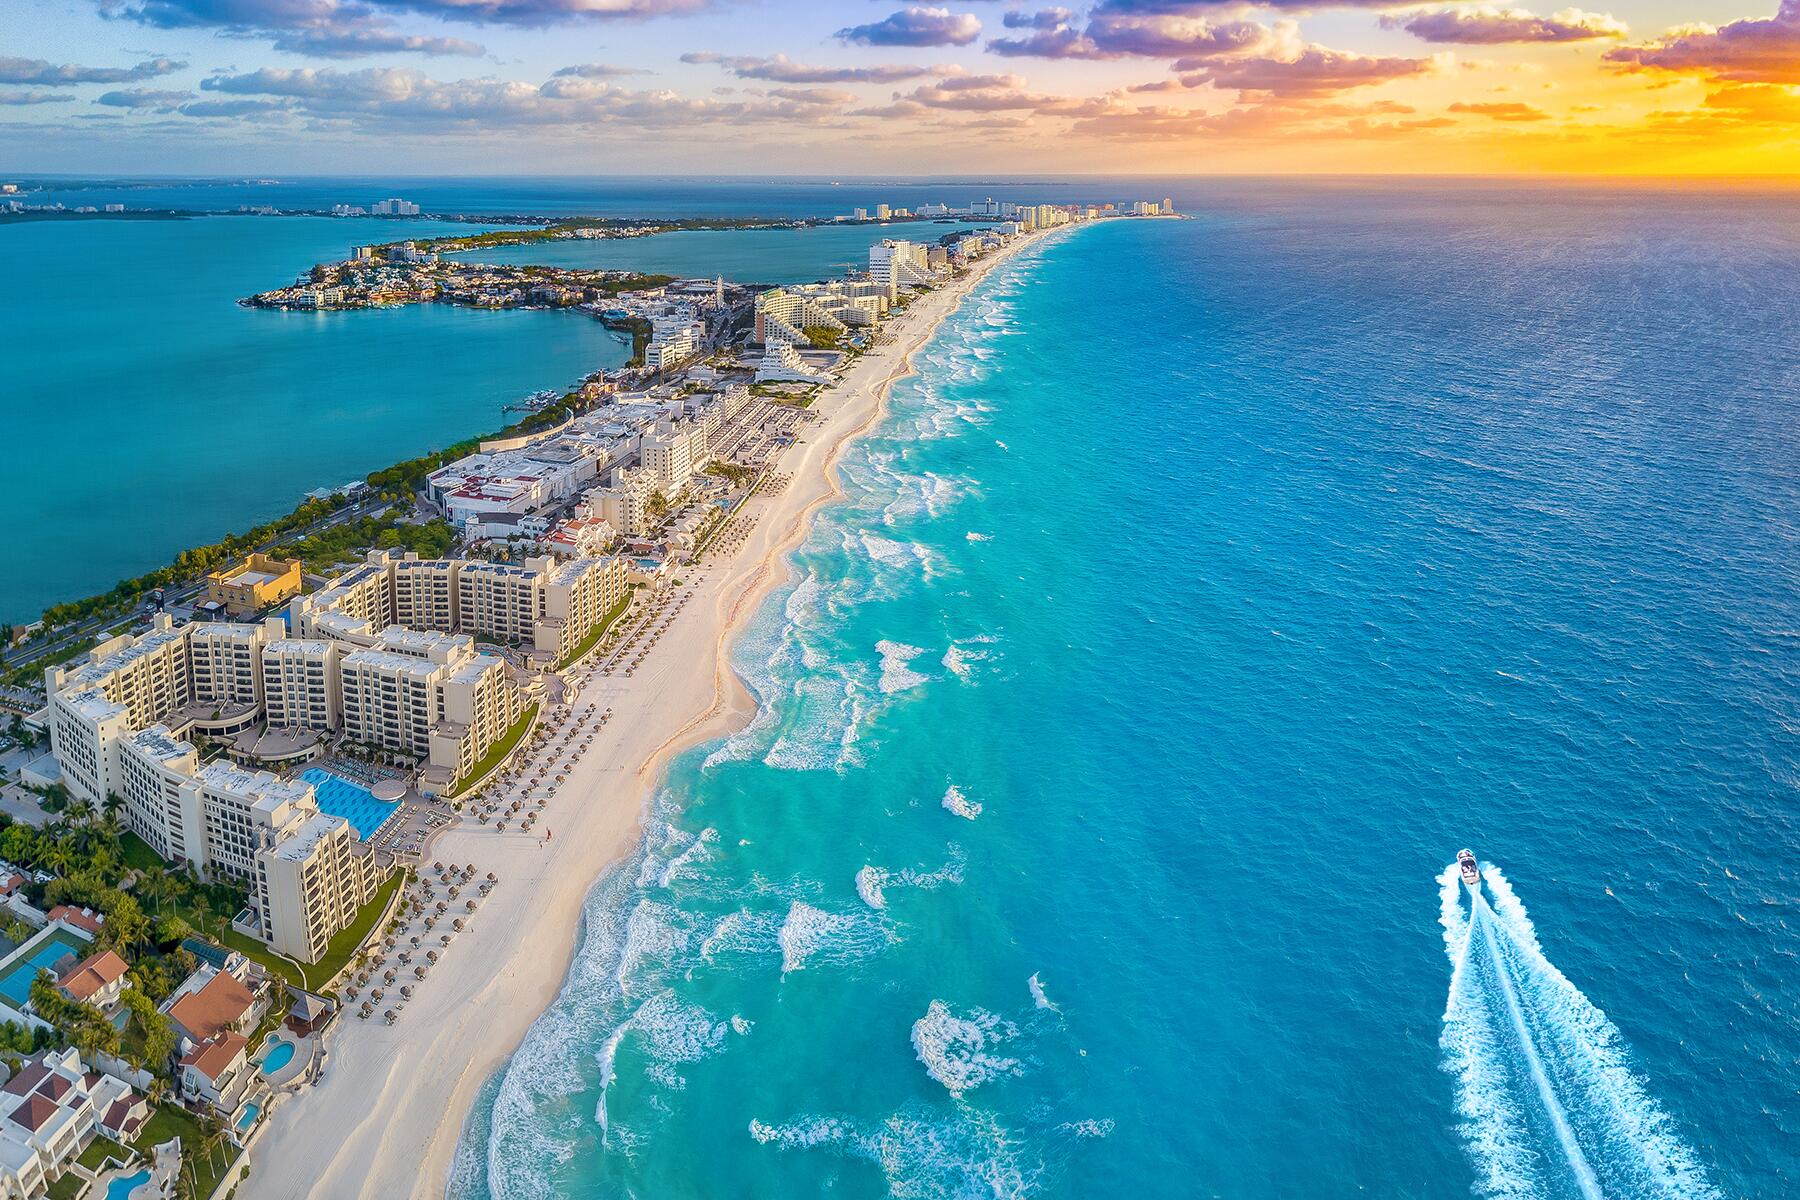 Is September a Good Time To Go to Cancun? The Family Vacation Guide